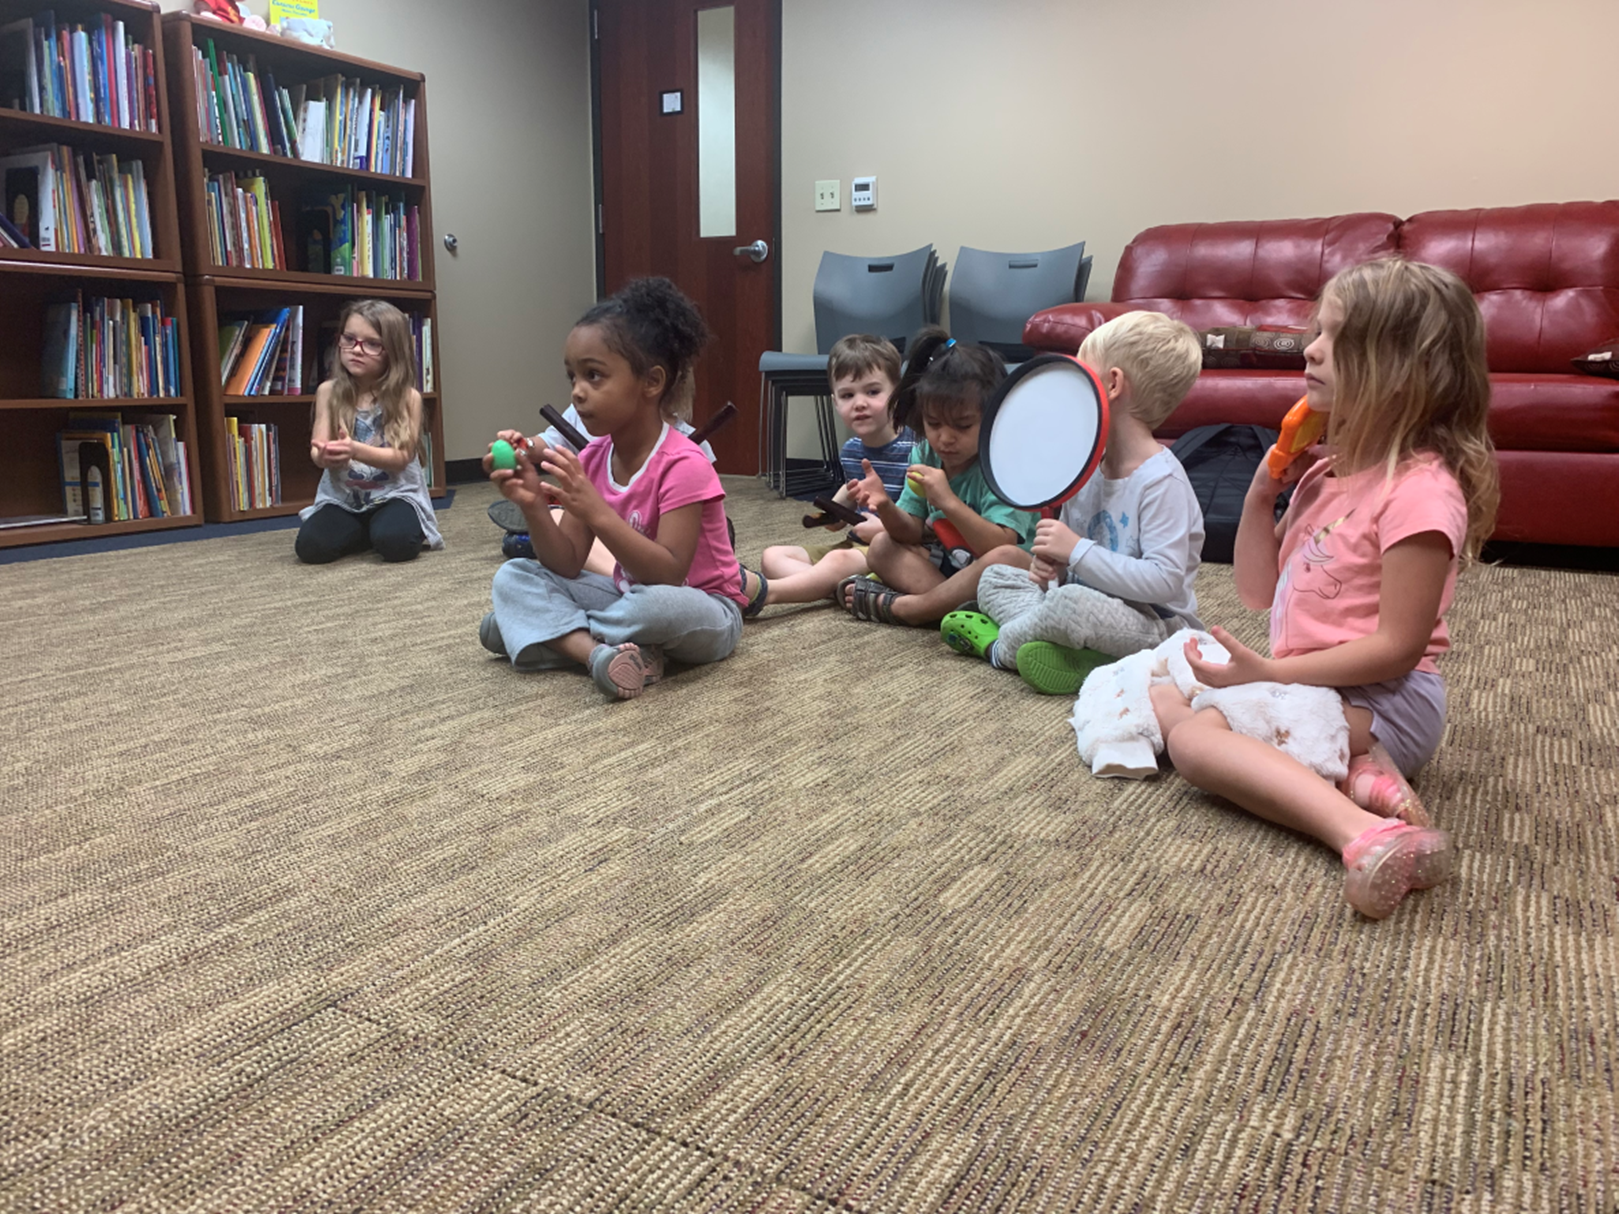 ECDC students sit in new music room and play instruments